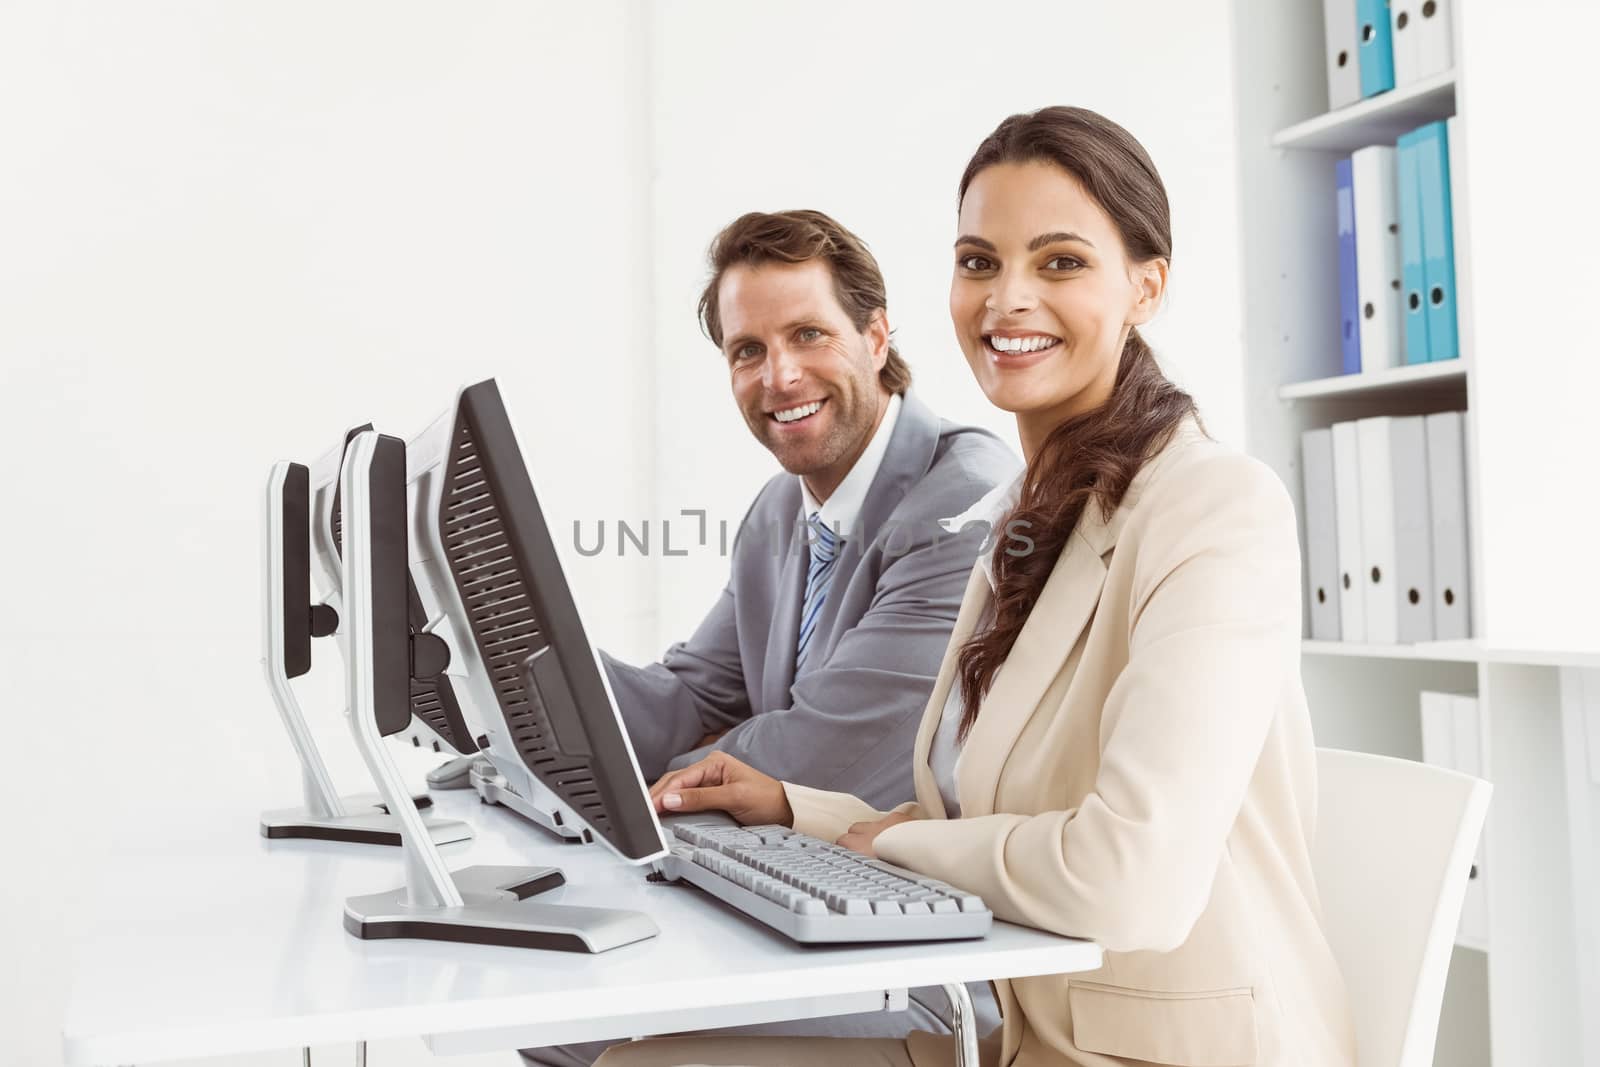 Two young business people using computers in office